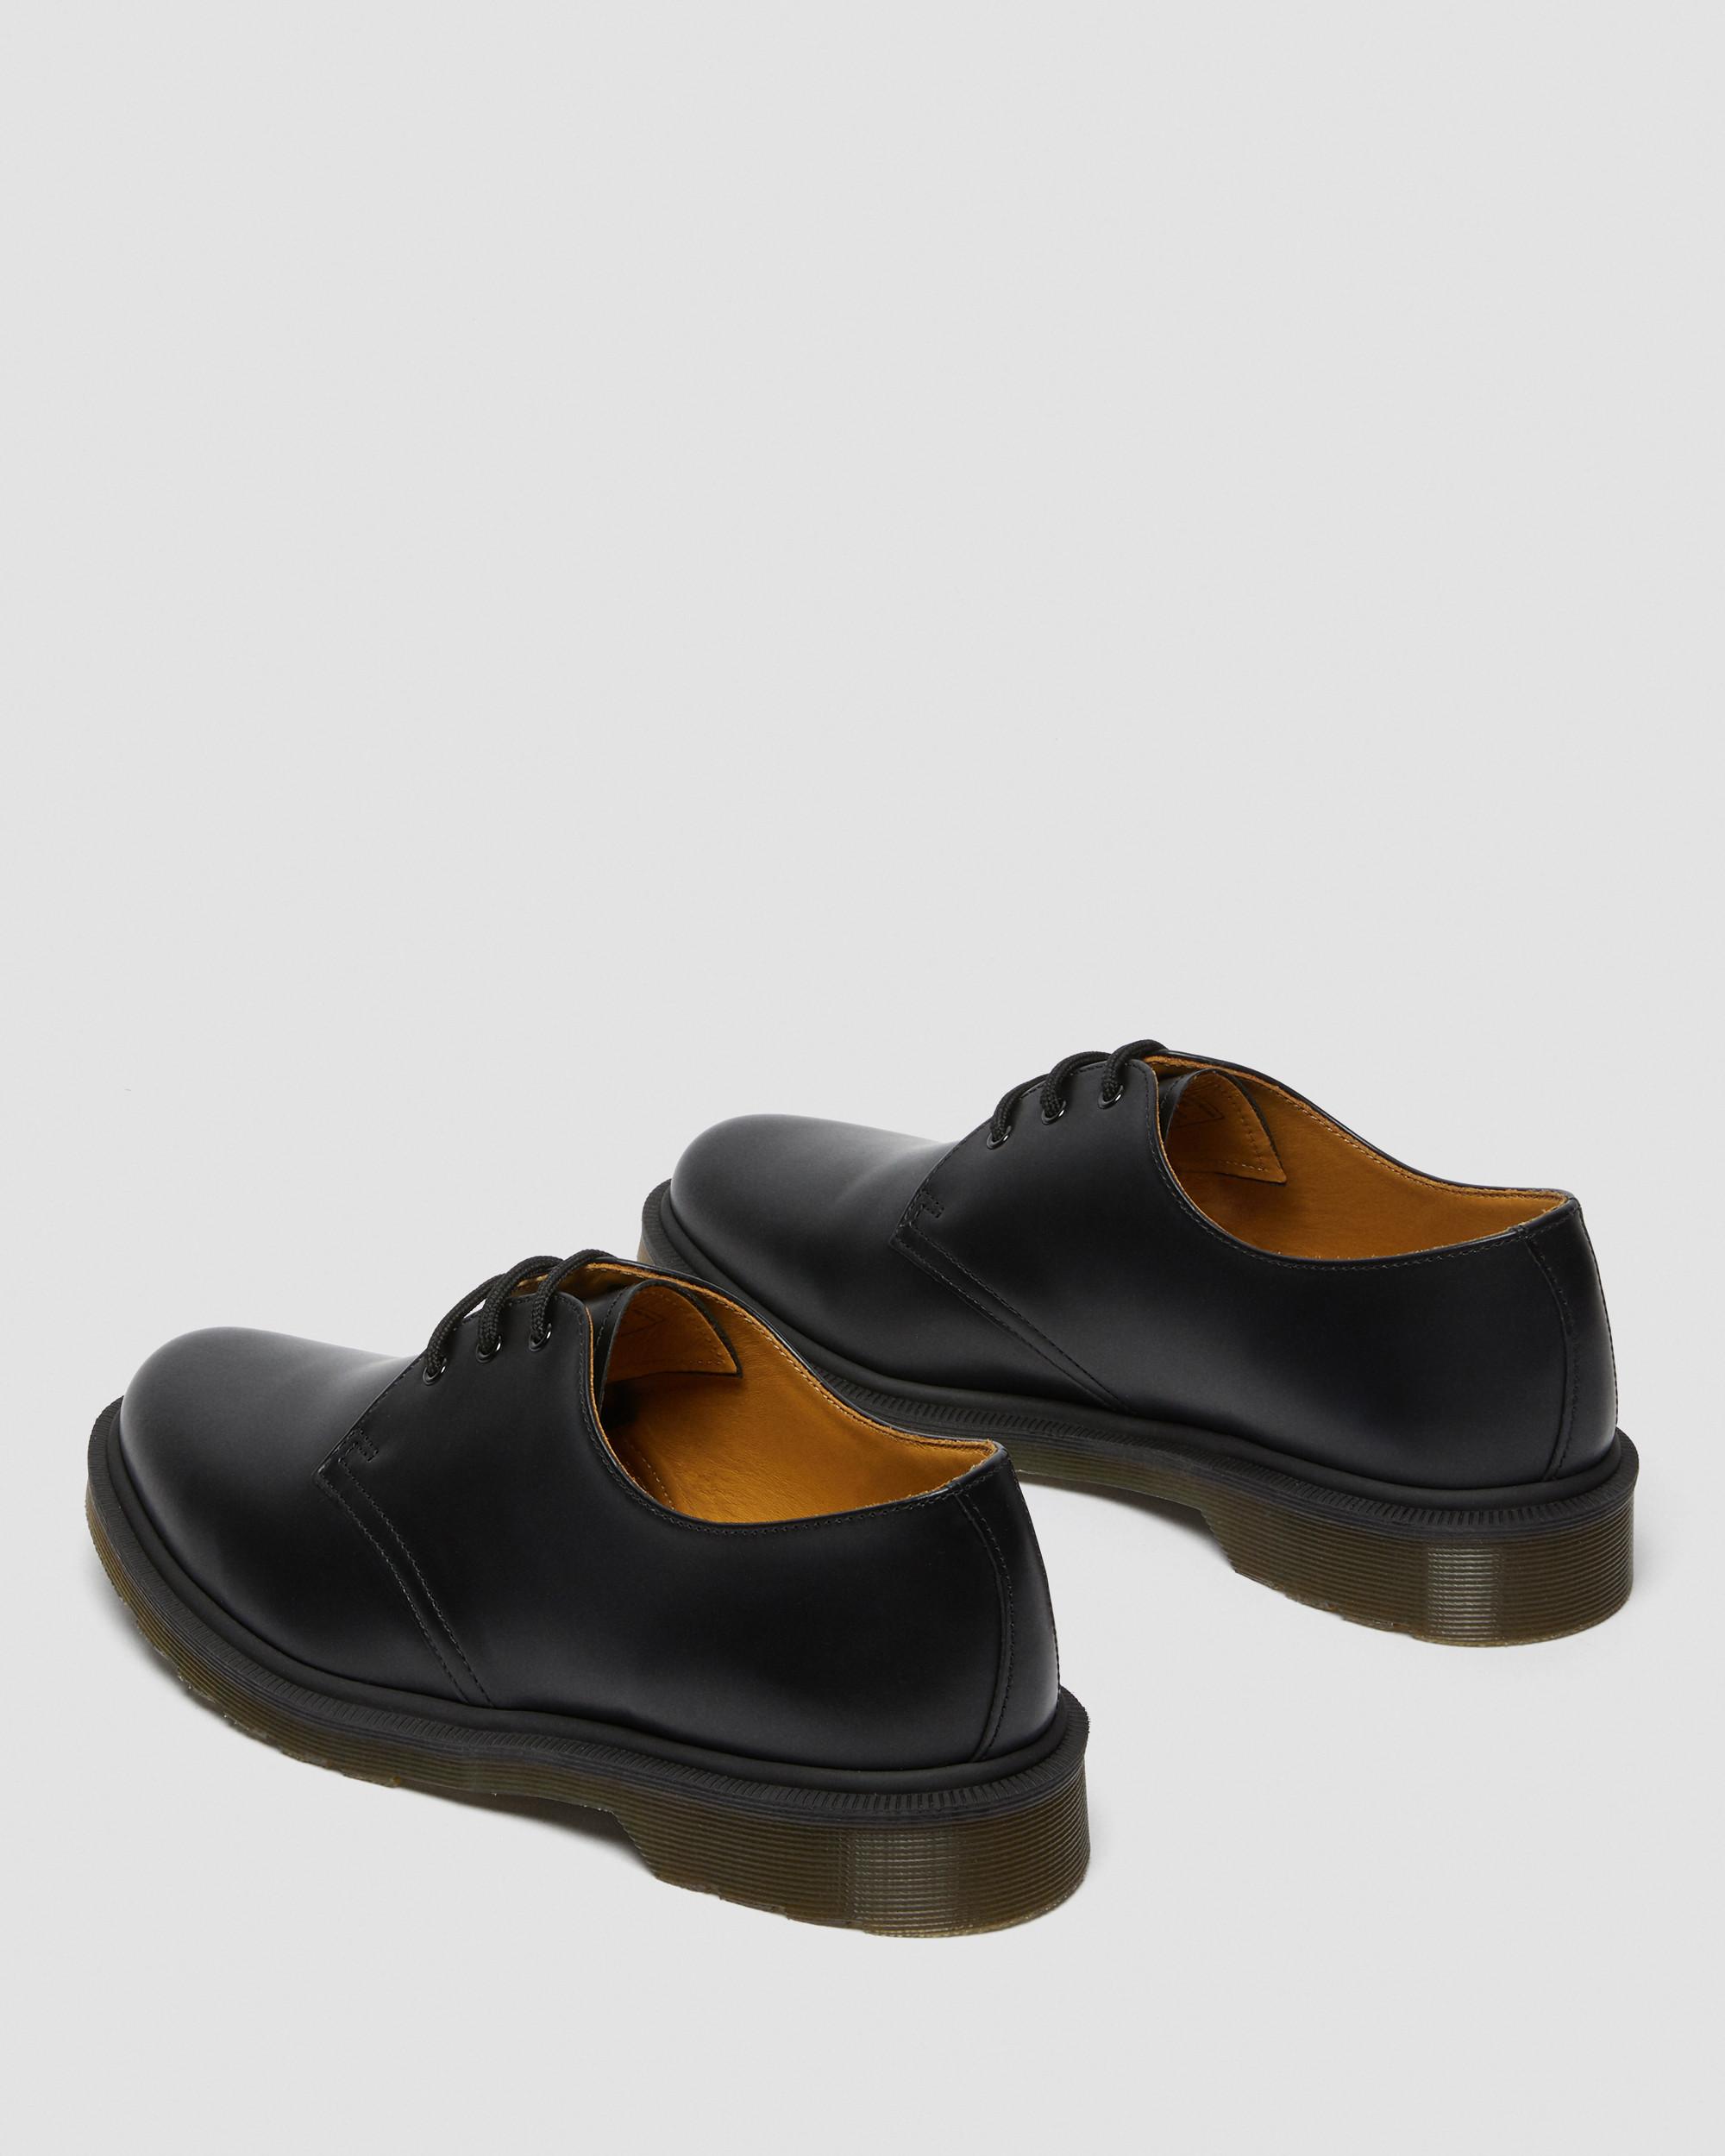 1461 Nauwe Normale Rand Smooth Leren Oxford Schoenen1461 Nauwe Normale Rand Smooth Leren Oxford Schoenen Dr. Martens